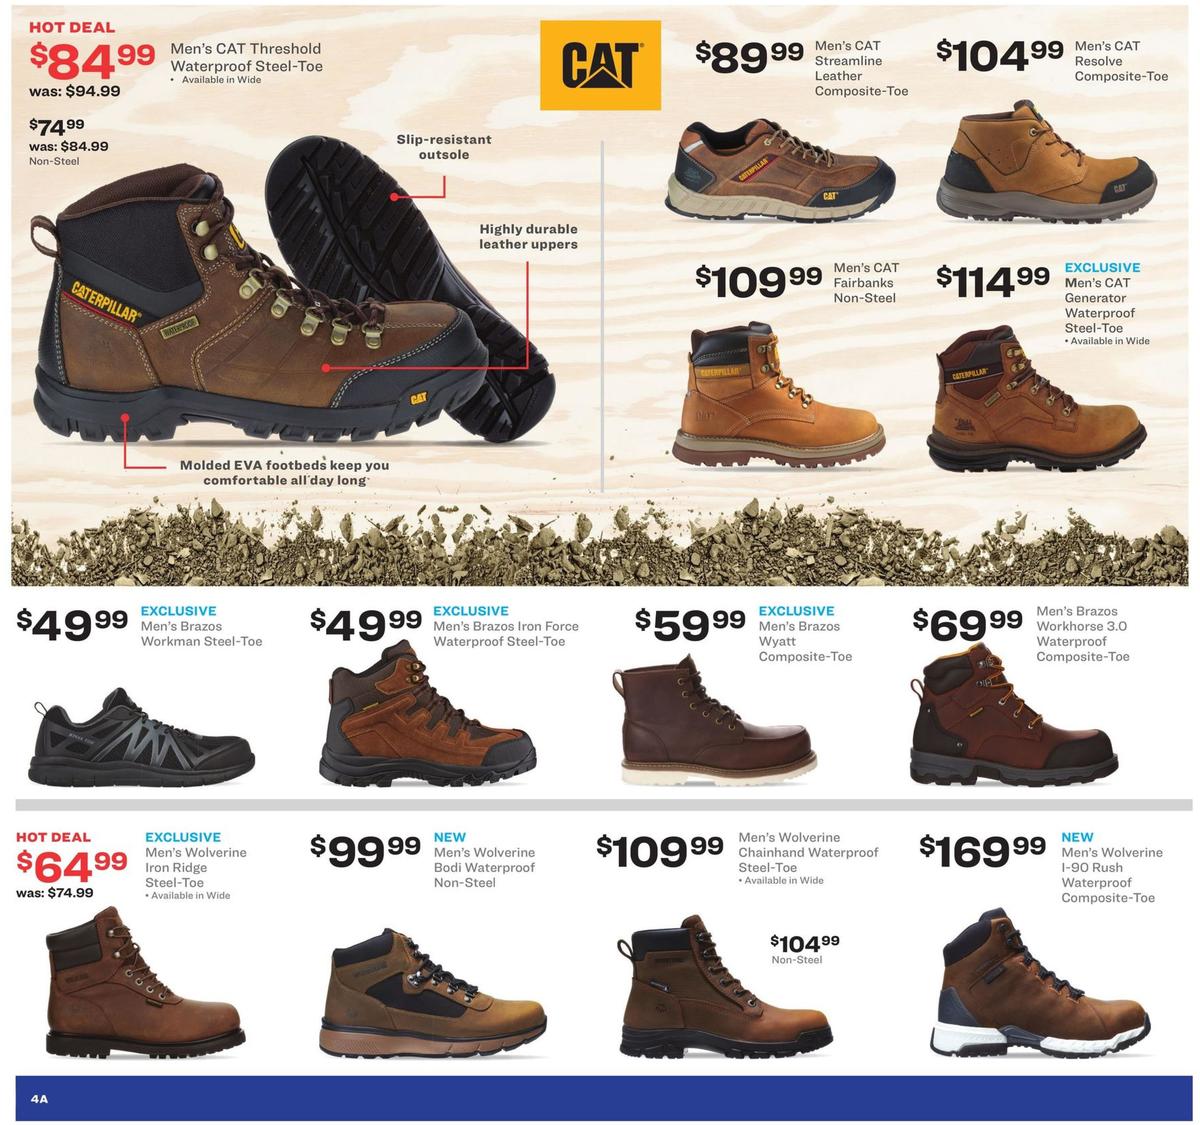 Academy Sports + Outdoors Fall 2019 Workwear Lookbook Weekly Ad from September 4